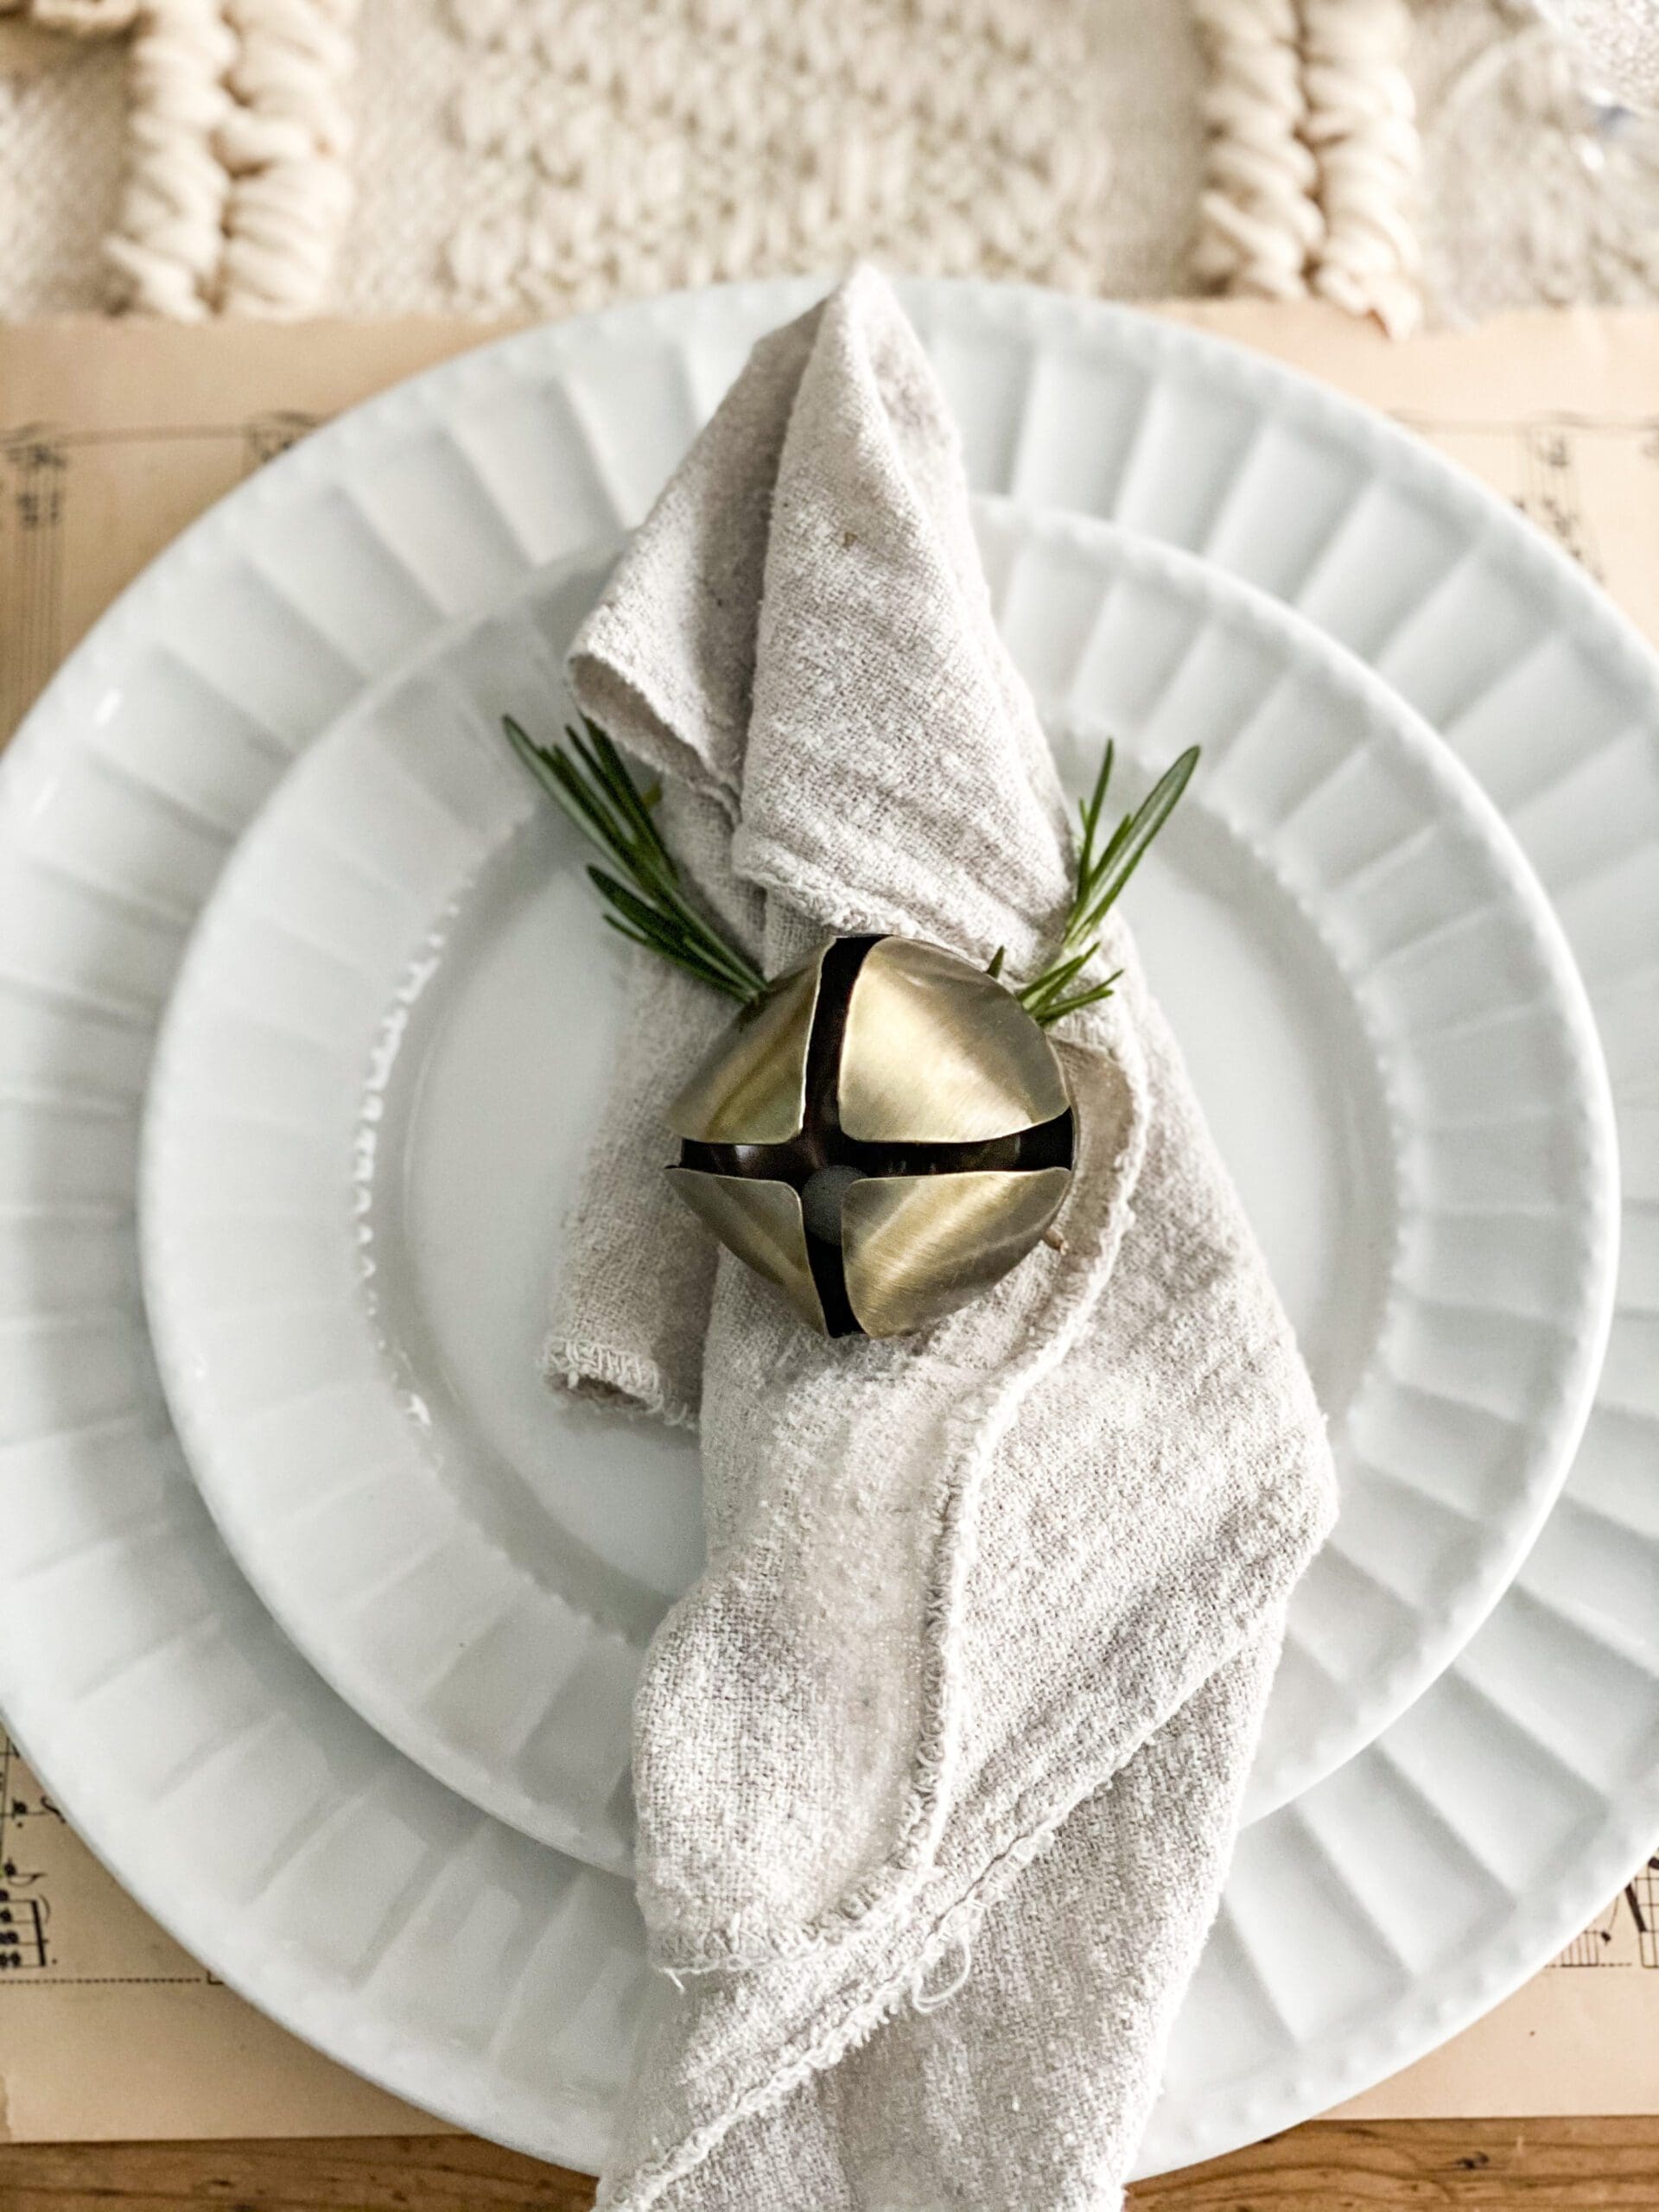 bell and small sprig tied to a napkin as a napkin ring